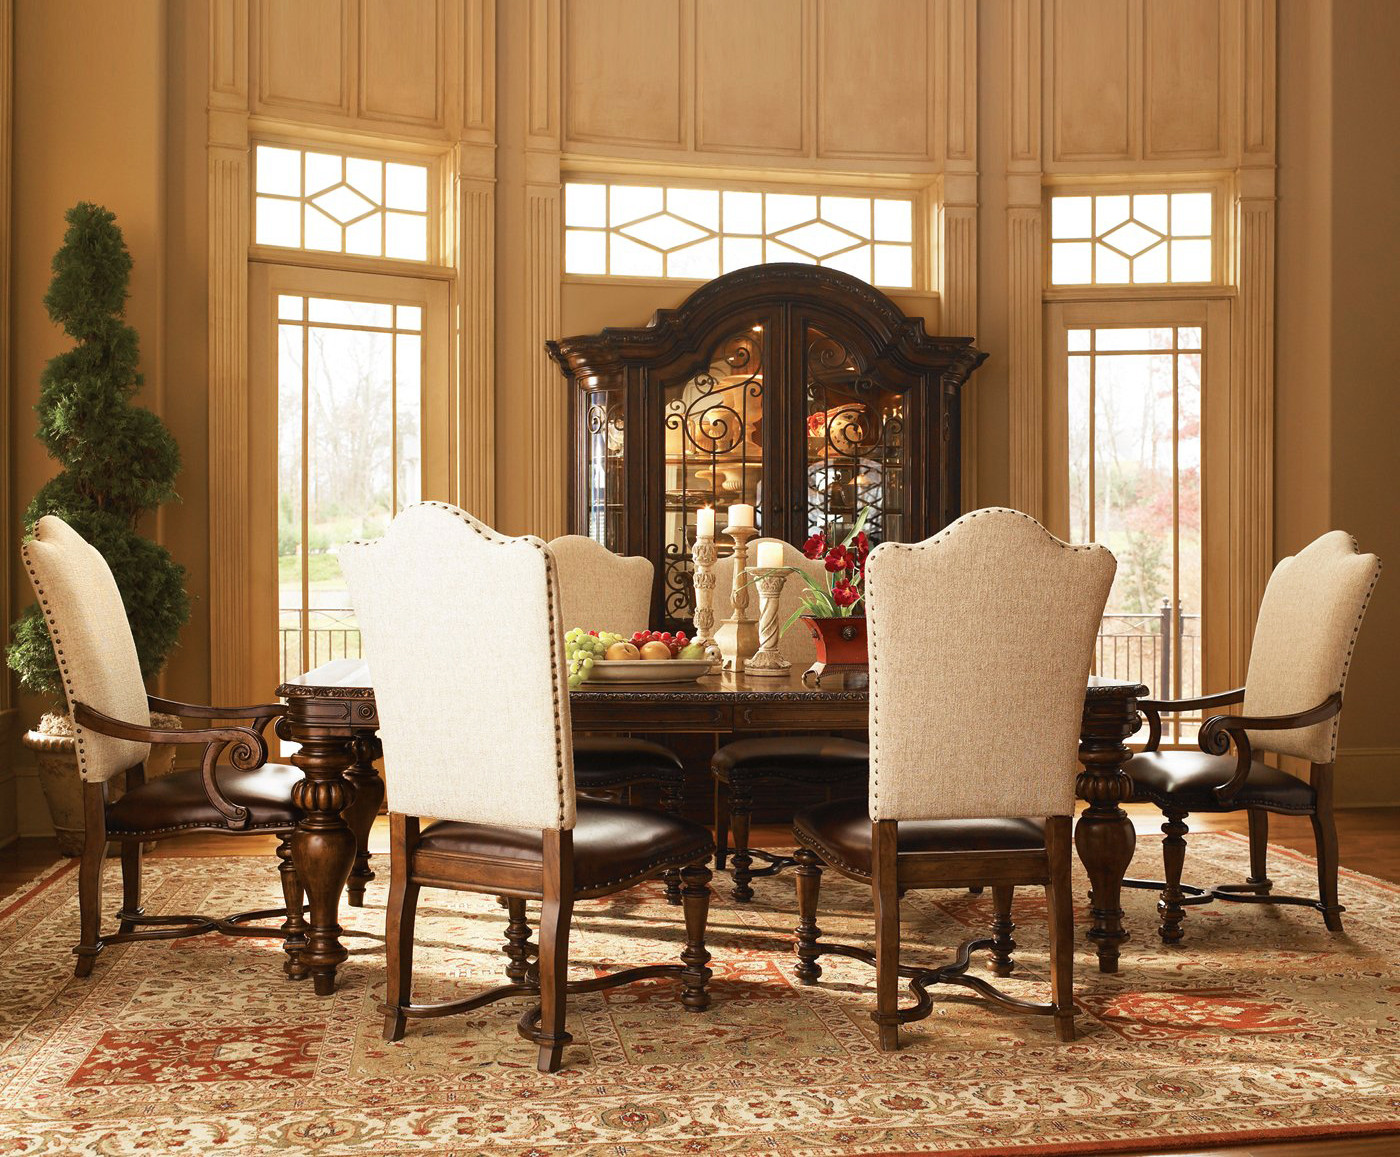 Formal Dining With Outstanding Formal Dining Room Sets With White Chairs On Rug Furnished With Table Decorated With Candle Holders And Completed With Cupboard Dining Room Formal Dining Room Sets For Contemporary Interiors